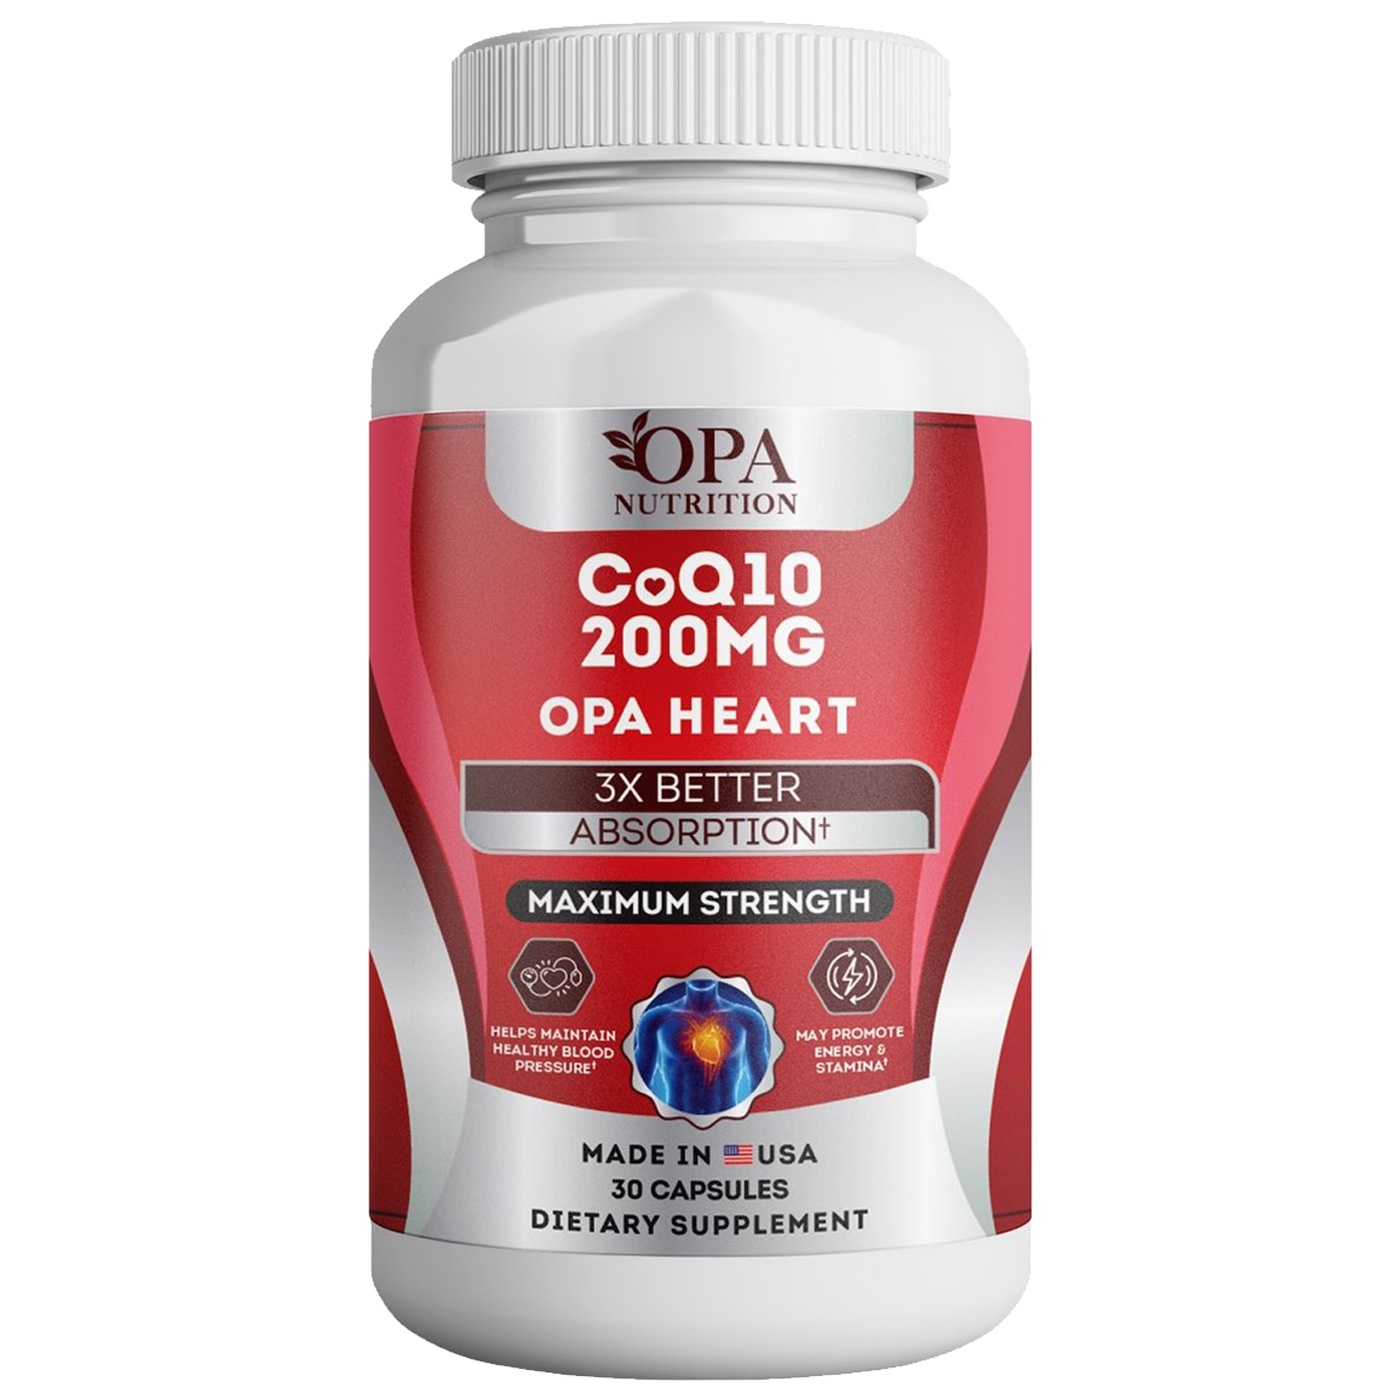 opa heart The no 1 Most Popular Blood Sugar Support Supplement!